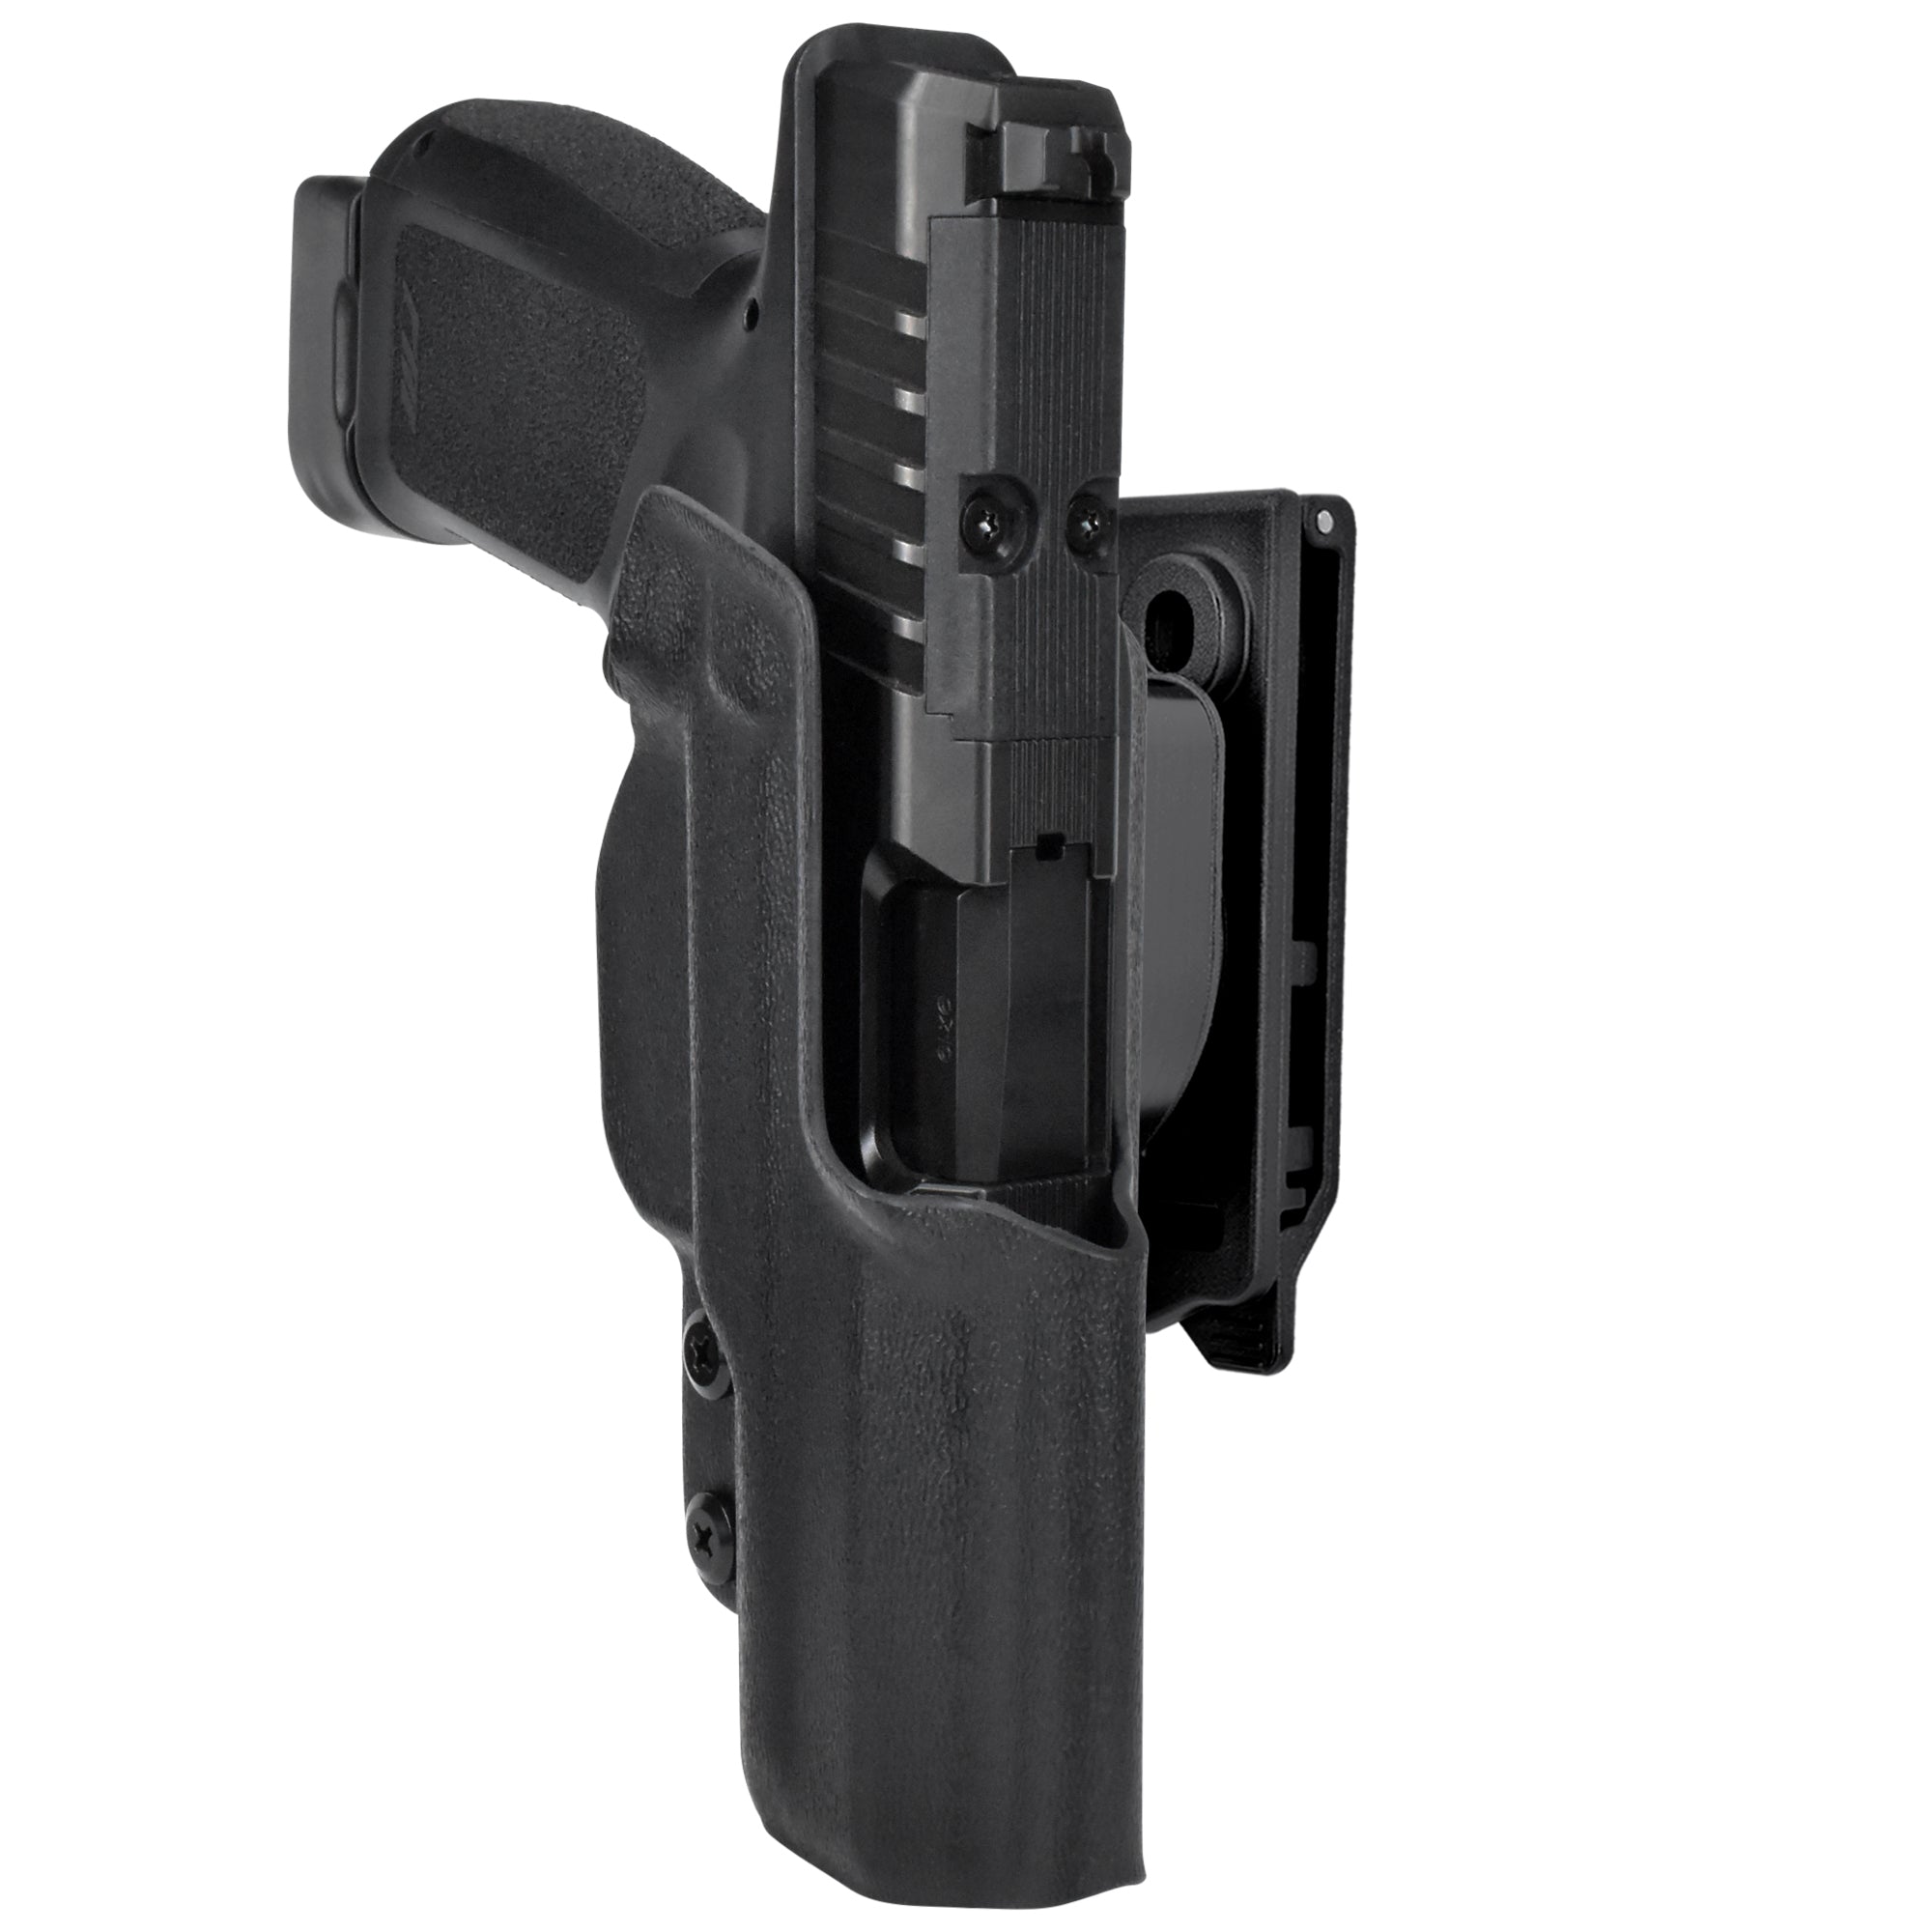 Rost Martin RM1C Quick Release IDPA Holster in Black